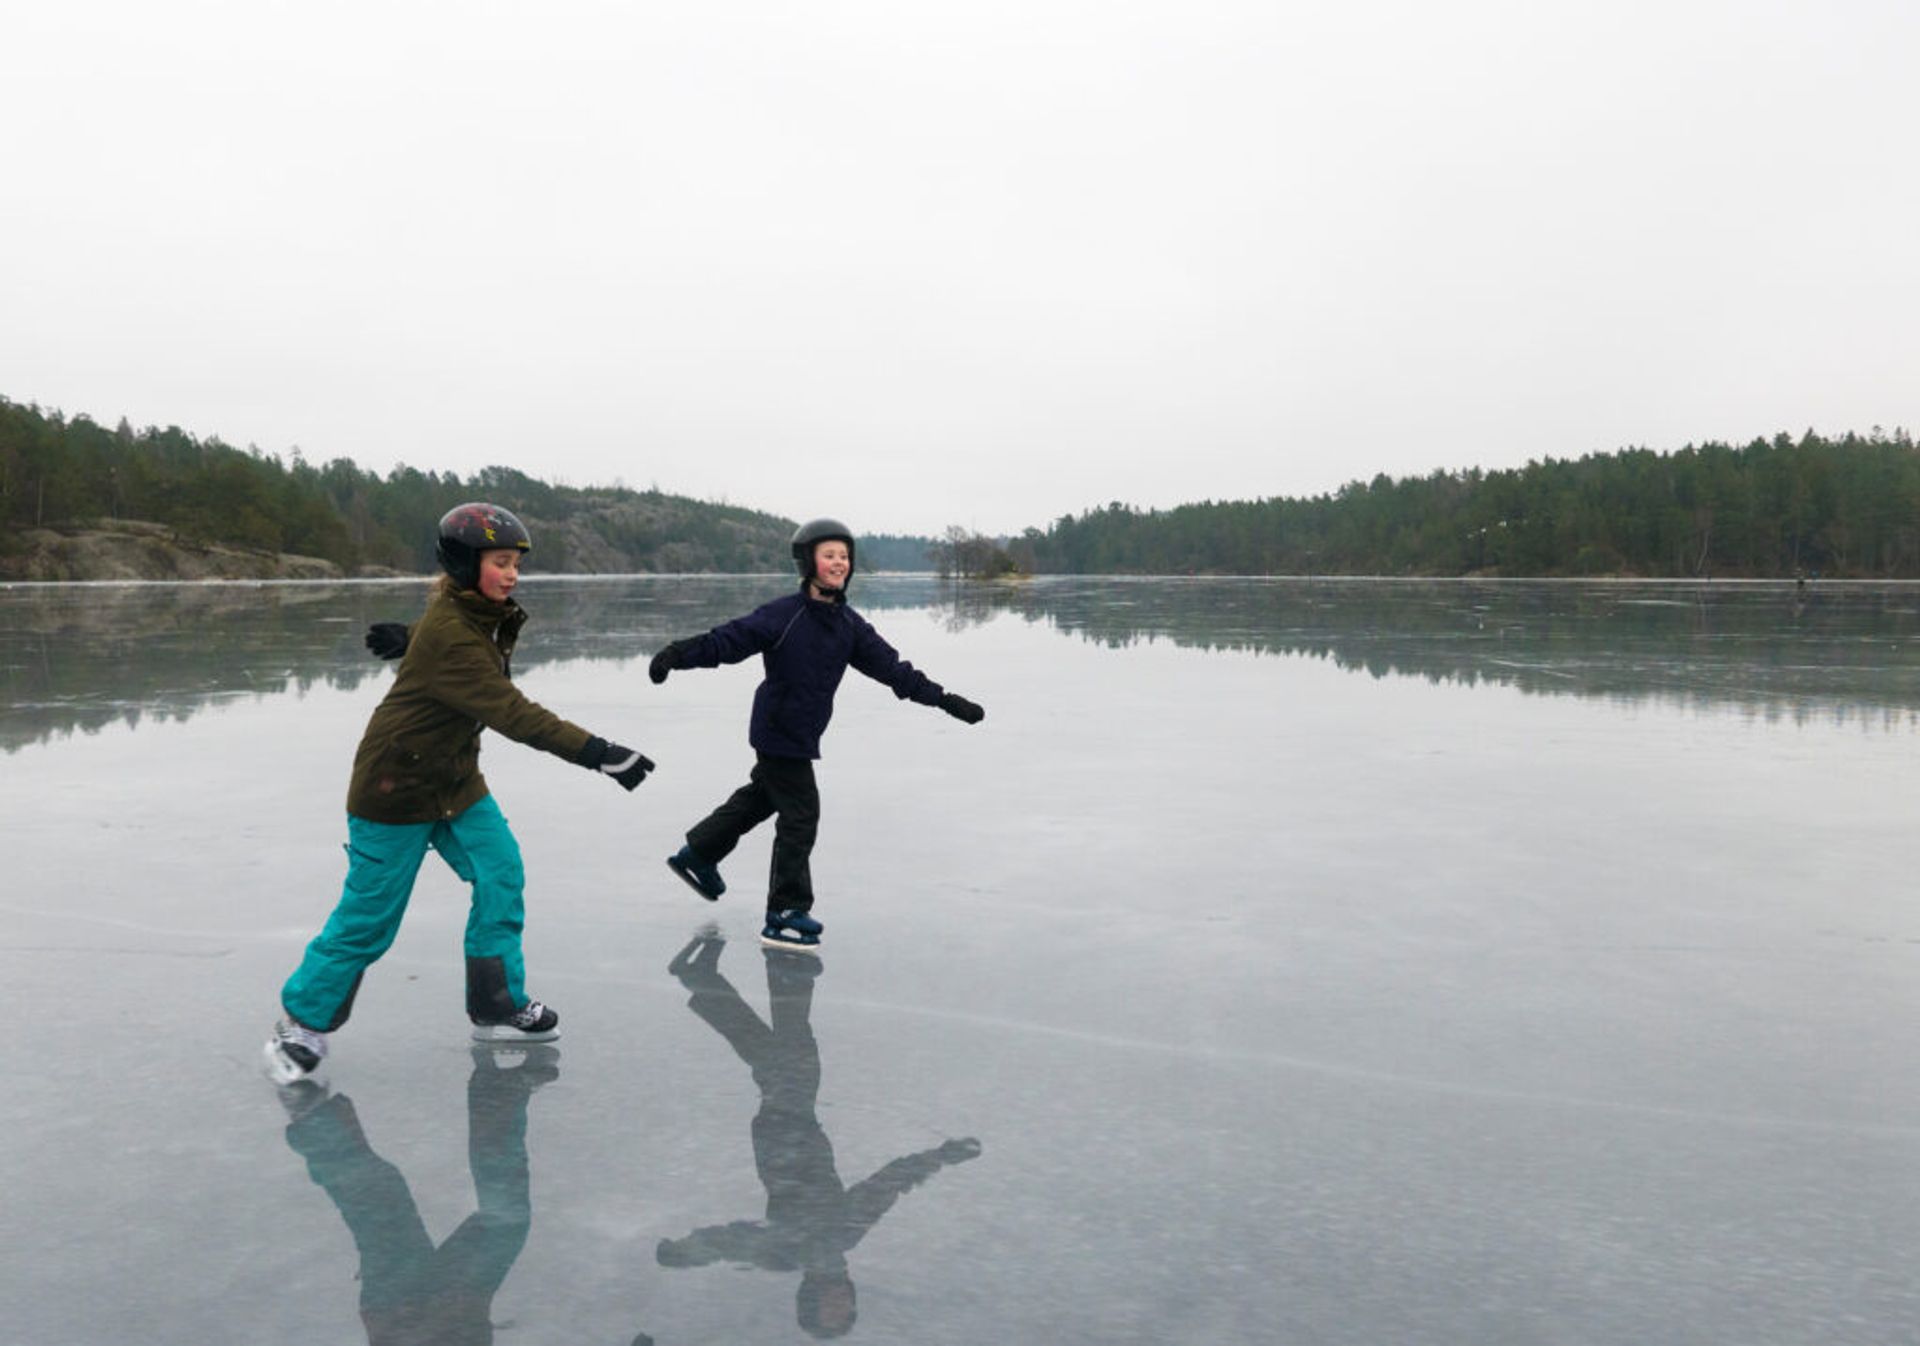 Two people ice skating on a frozen lake on a gloomy day.